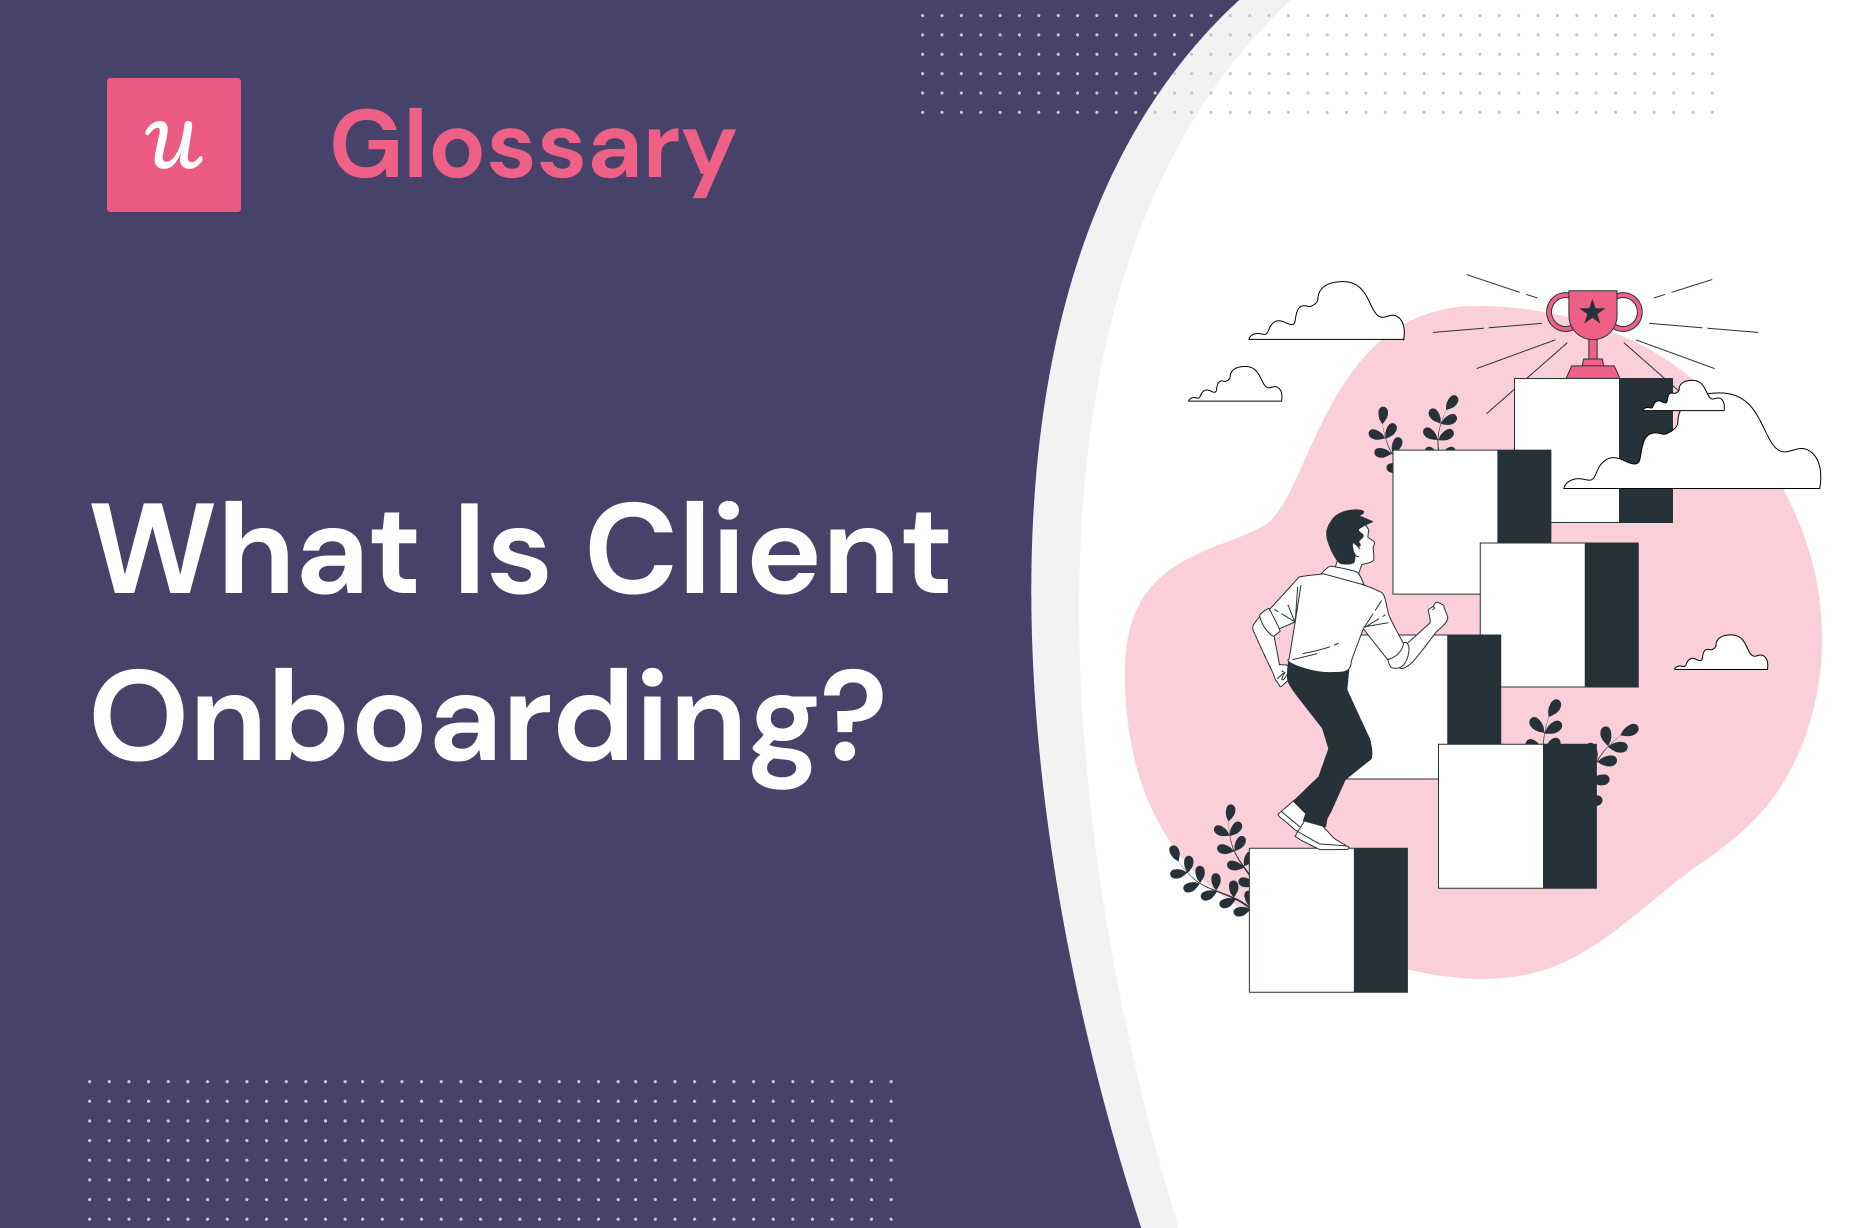 What is Client Onboarding?